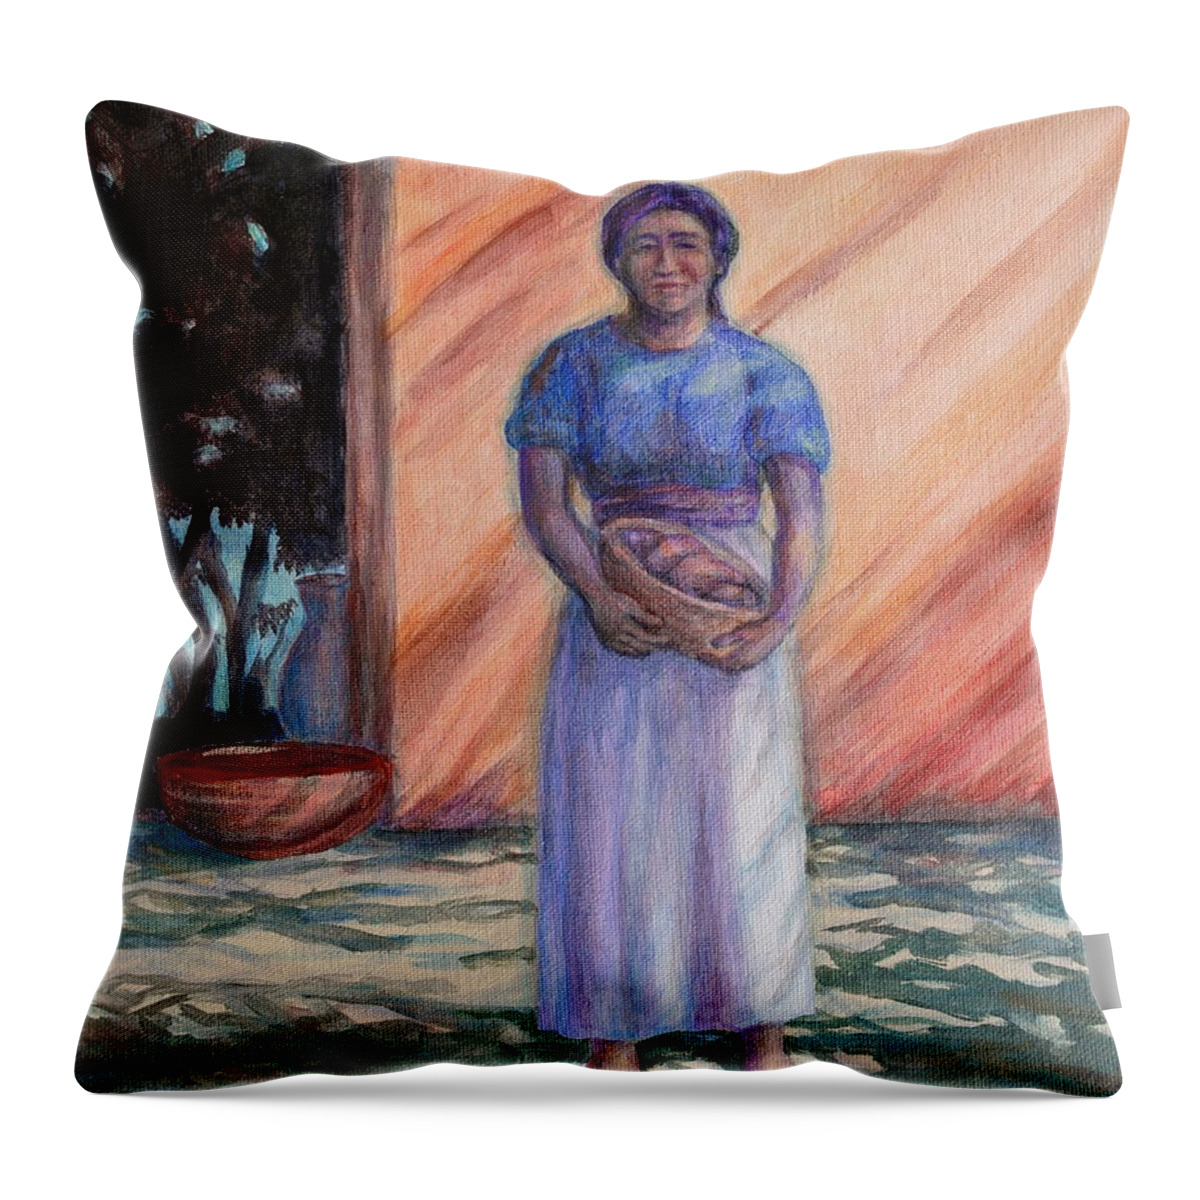 Acrylic Throw Pillow featuring the painting Mujer en las Sombras - Woman in the Shadows by Michele Myers